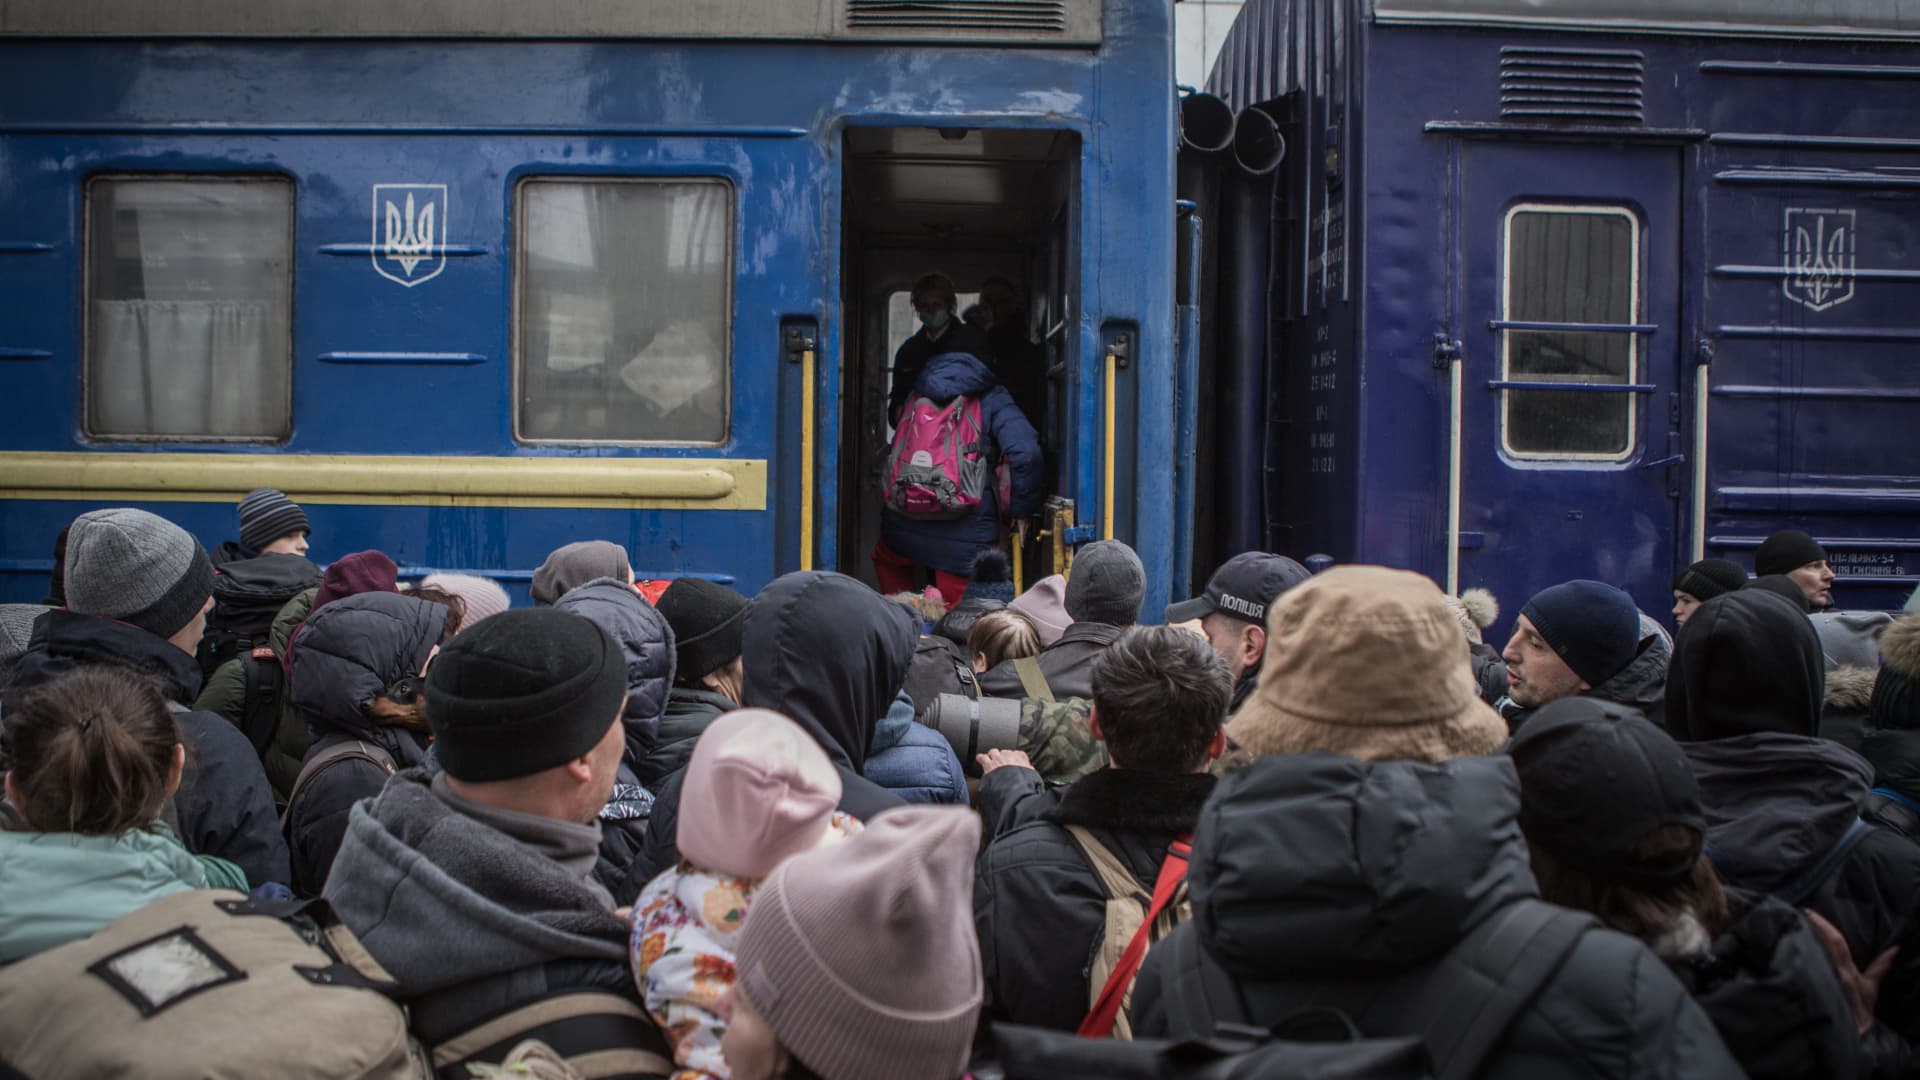 People wait to depart to Lviv by train on the 7th day since start of large-scale Russian attacks in the country, in Dnipro, Ukraine on March 02, 2022.